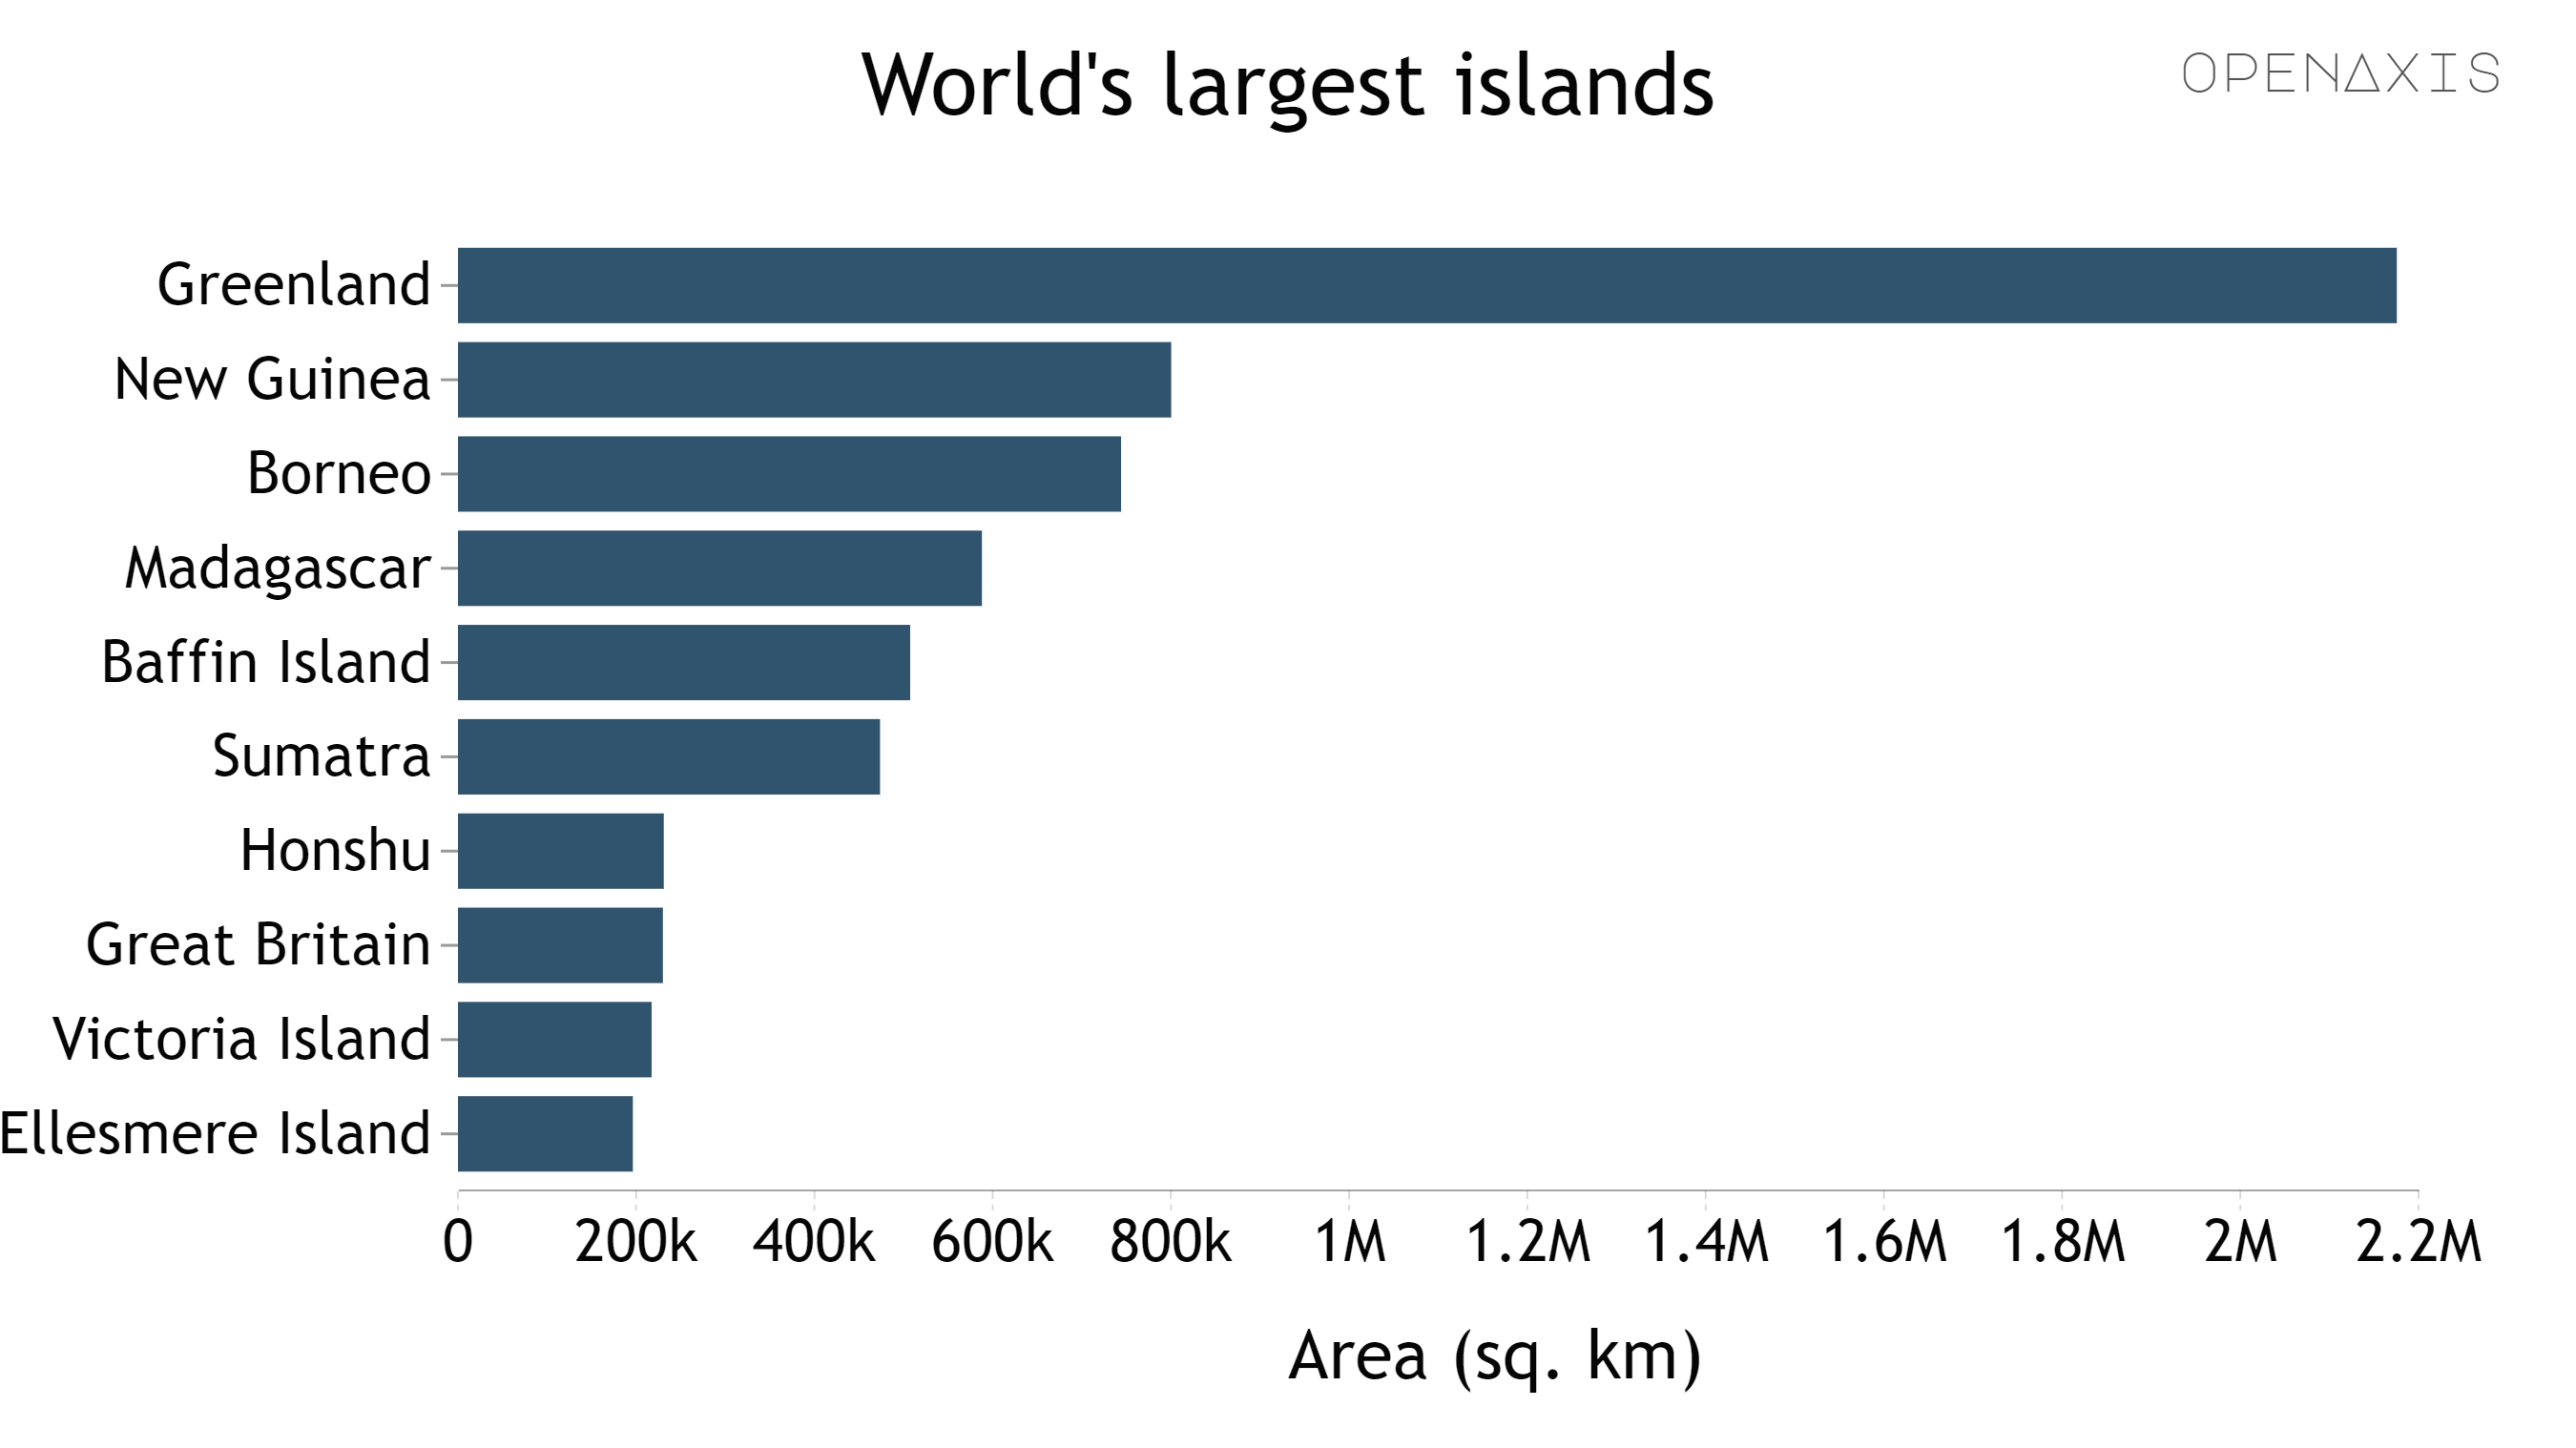 <p>The 100 biggest islands range from the likes of expansive Greenland to independent Guadalcanal, the largest of the Solomon Islands. But look a little closer, and you’ll see just how much the top contender outshines the rest. Greenland is almost three times the size of the second-biggest island of New Guinea, and you could fit over 408 Guadalcanal islands within it.</p><p><br /></p><p>Quite a few islands around the world are very large, and many of them are countries. Australia is technically an island because it is unconnected to any other body of land, but it is more commonly considered a continental landmass. Of the seven continents, Australia is the smallest, at 2,969,976 square miles, or 7,692,202 square kilometers.</p><p><br /></p><p><span data-index="0" data-denotation-char data-id="0" data-value="&lt;a href=&quot;/search?q=%23islands&quot; target=_self&gt;#islands" data-link="/search?q=%23islands">﻿<span contenteditable="false"><span></span><a href="/search?q=%23islands" target="_self">#islands</a></span>﻿</span> <span data-index="0" data-denotation-char data-id="0" data-value="&lt;a href=&quot;/search?q=%23geography&quot; target=_self&gt;#geography" data-link="/search?q=%23geography">﻿<span contenteditable="false"><span></span><a href="/search?q=%23geography" target="_self">#geography</a></span>﻿</span></p><p><br /></p><p>Source: <a href="/data/3882" target="_blank">U.S. Geological Survey, World Economic Forum</a></p><p><br /></p>